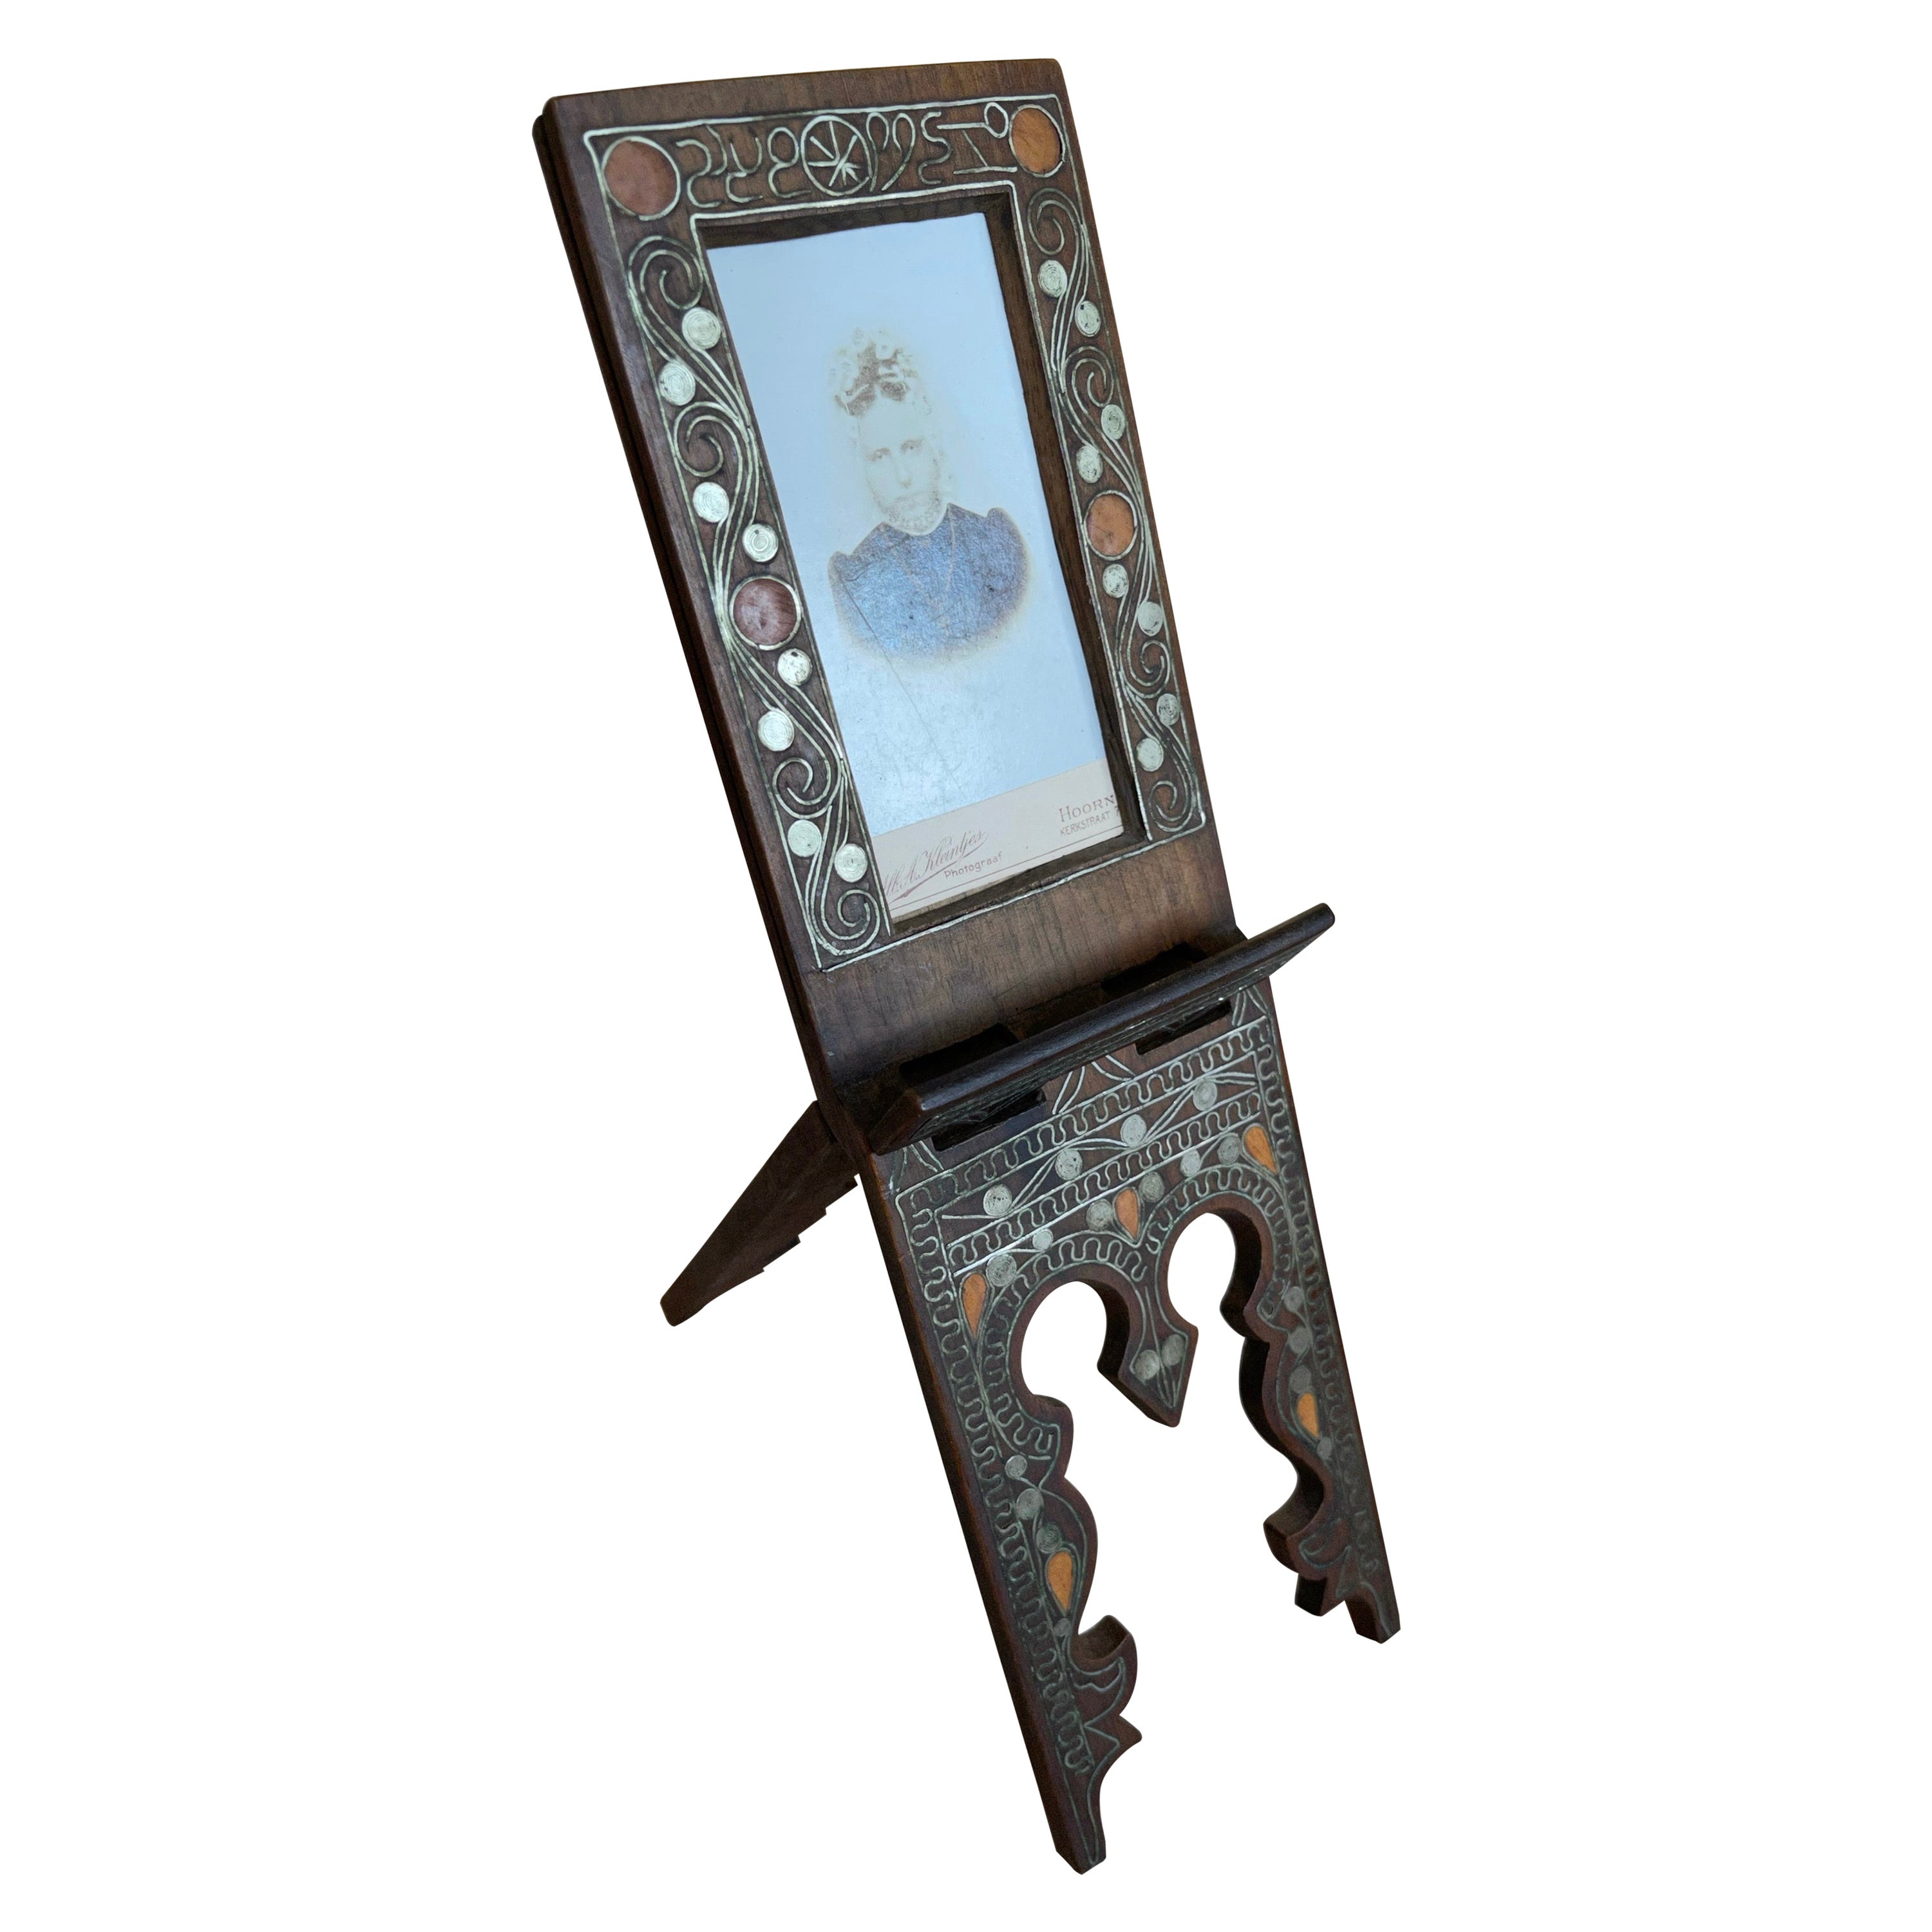 Arabic Antique Wooden Photo / Picture Frame Easel Inlaid Silver Scrolling Motifs